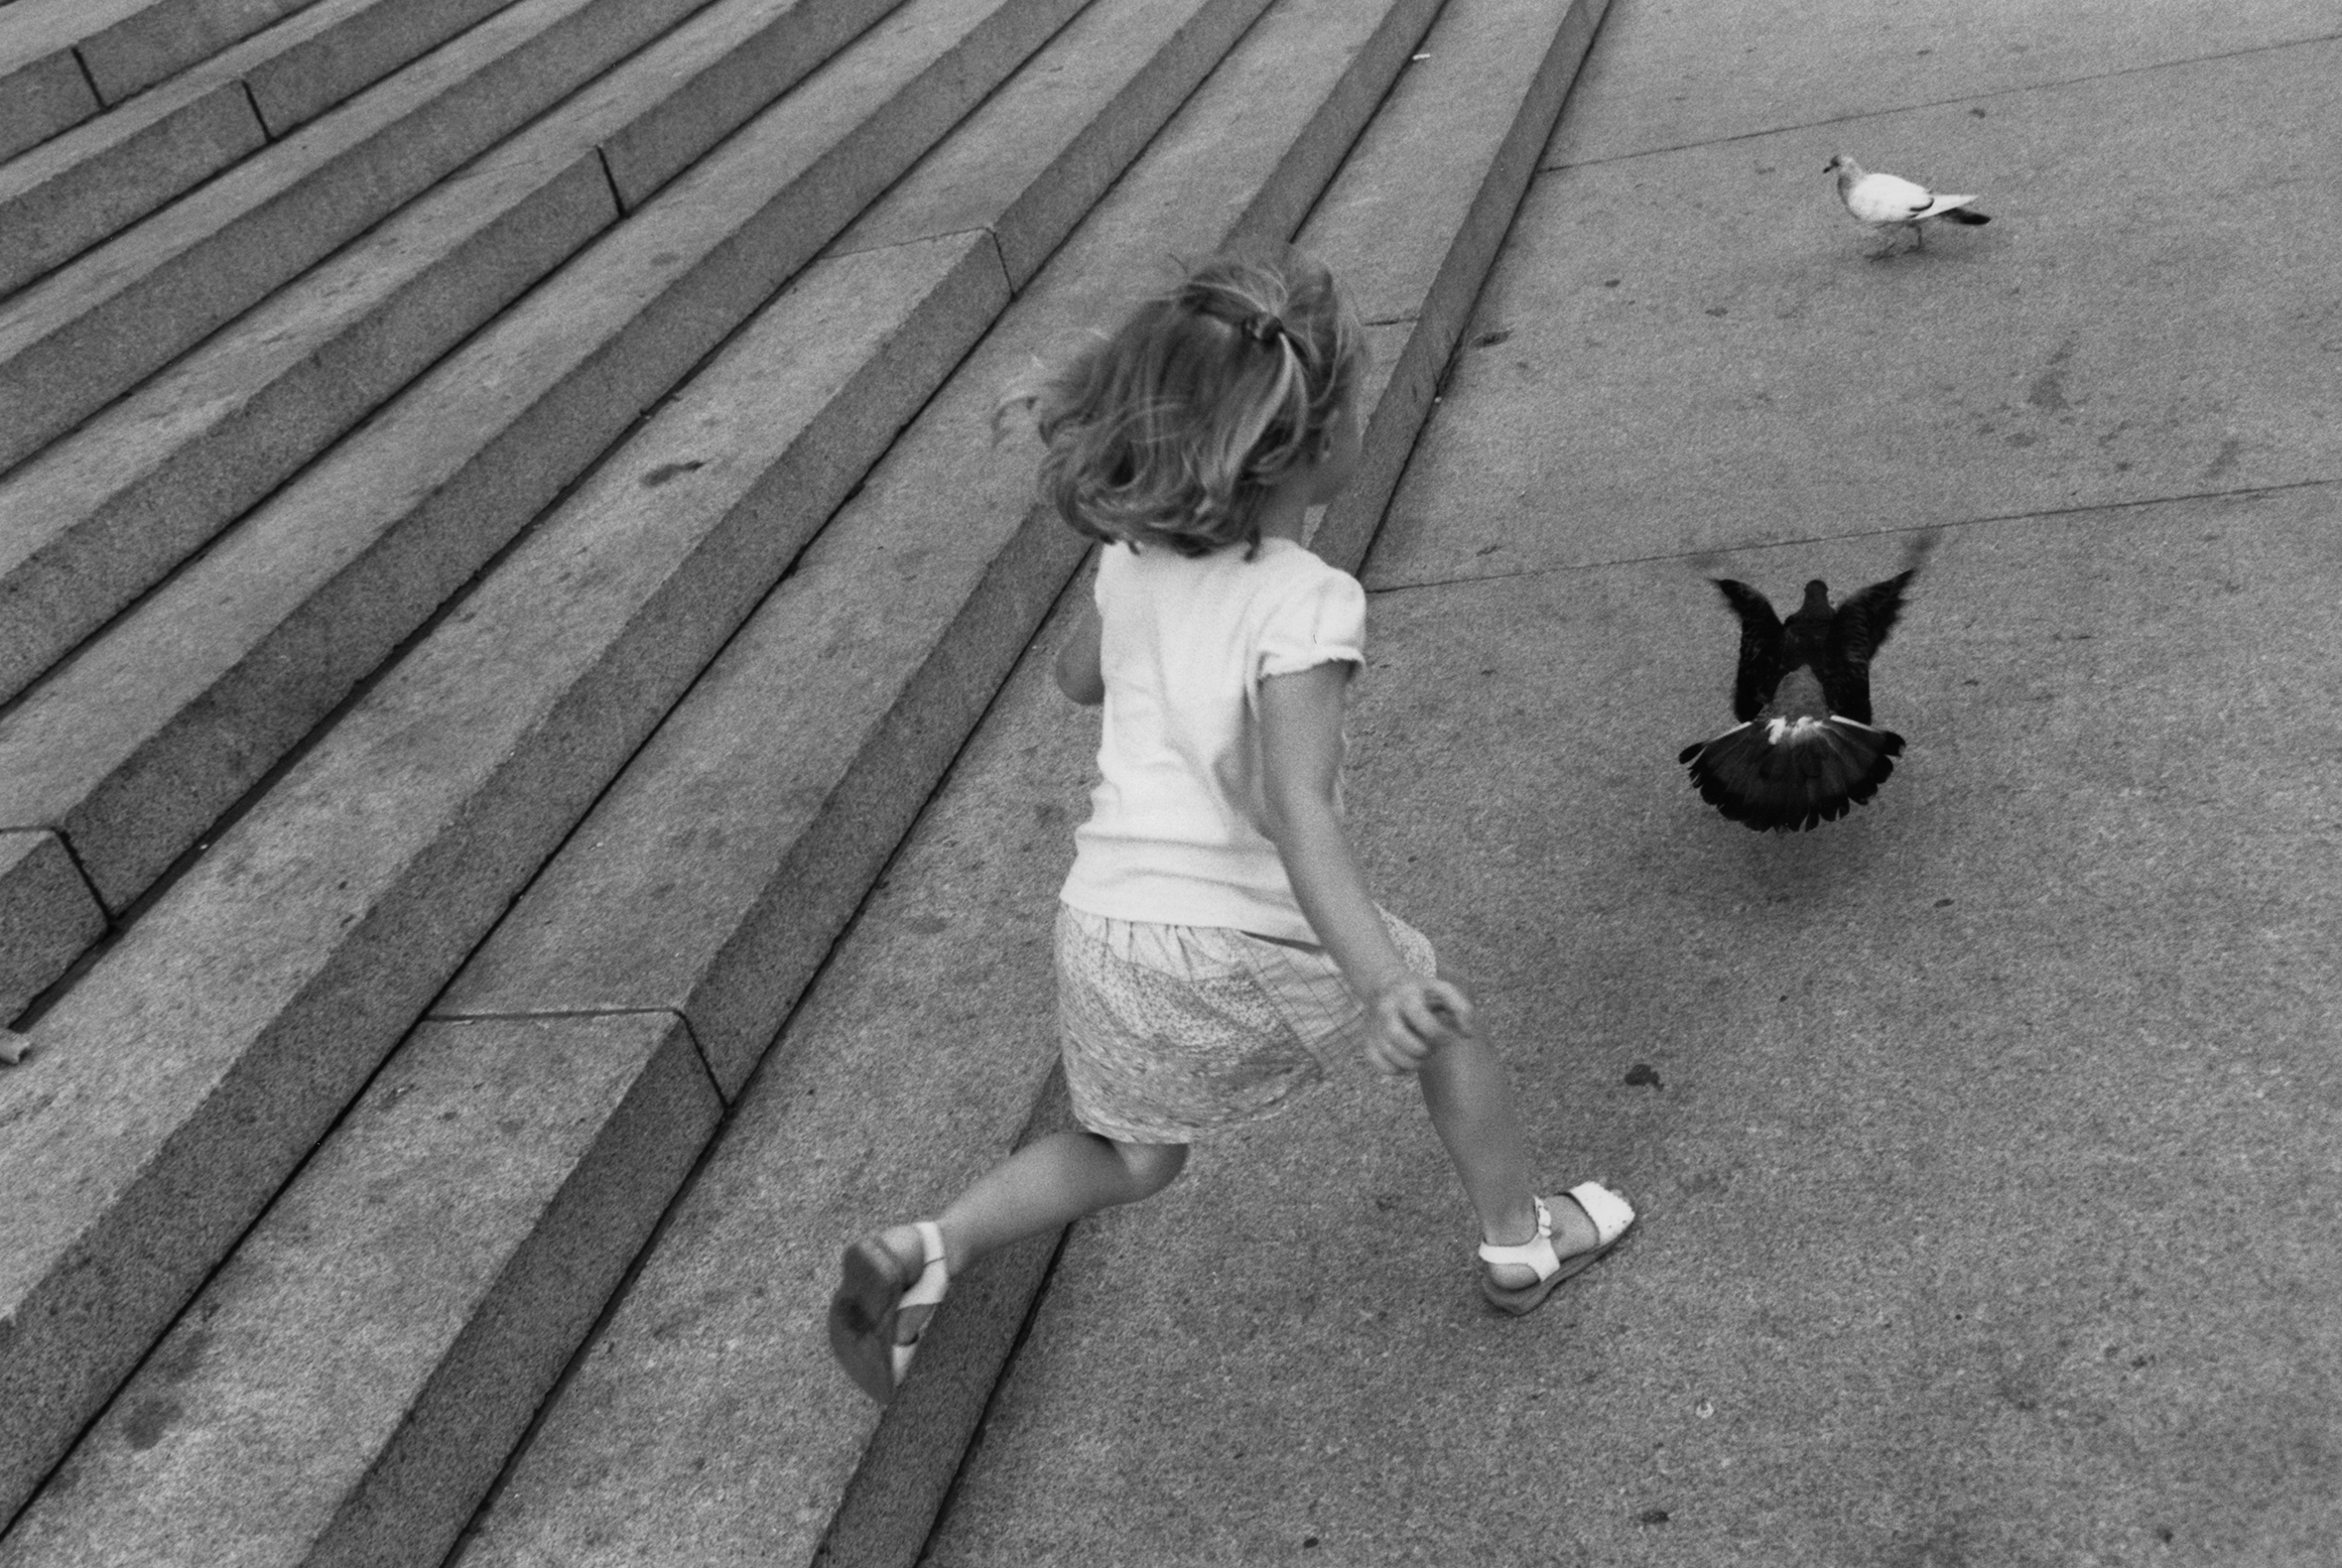 A little girl with shoulder-length hair wearing a white short-sleeved shirt, print skirt, and white sandals is seen from the side stepping off the bottom step of a wide set of steps in the city chasing a pigeon.